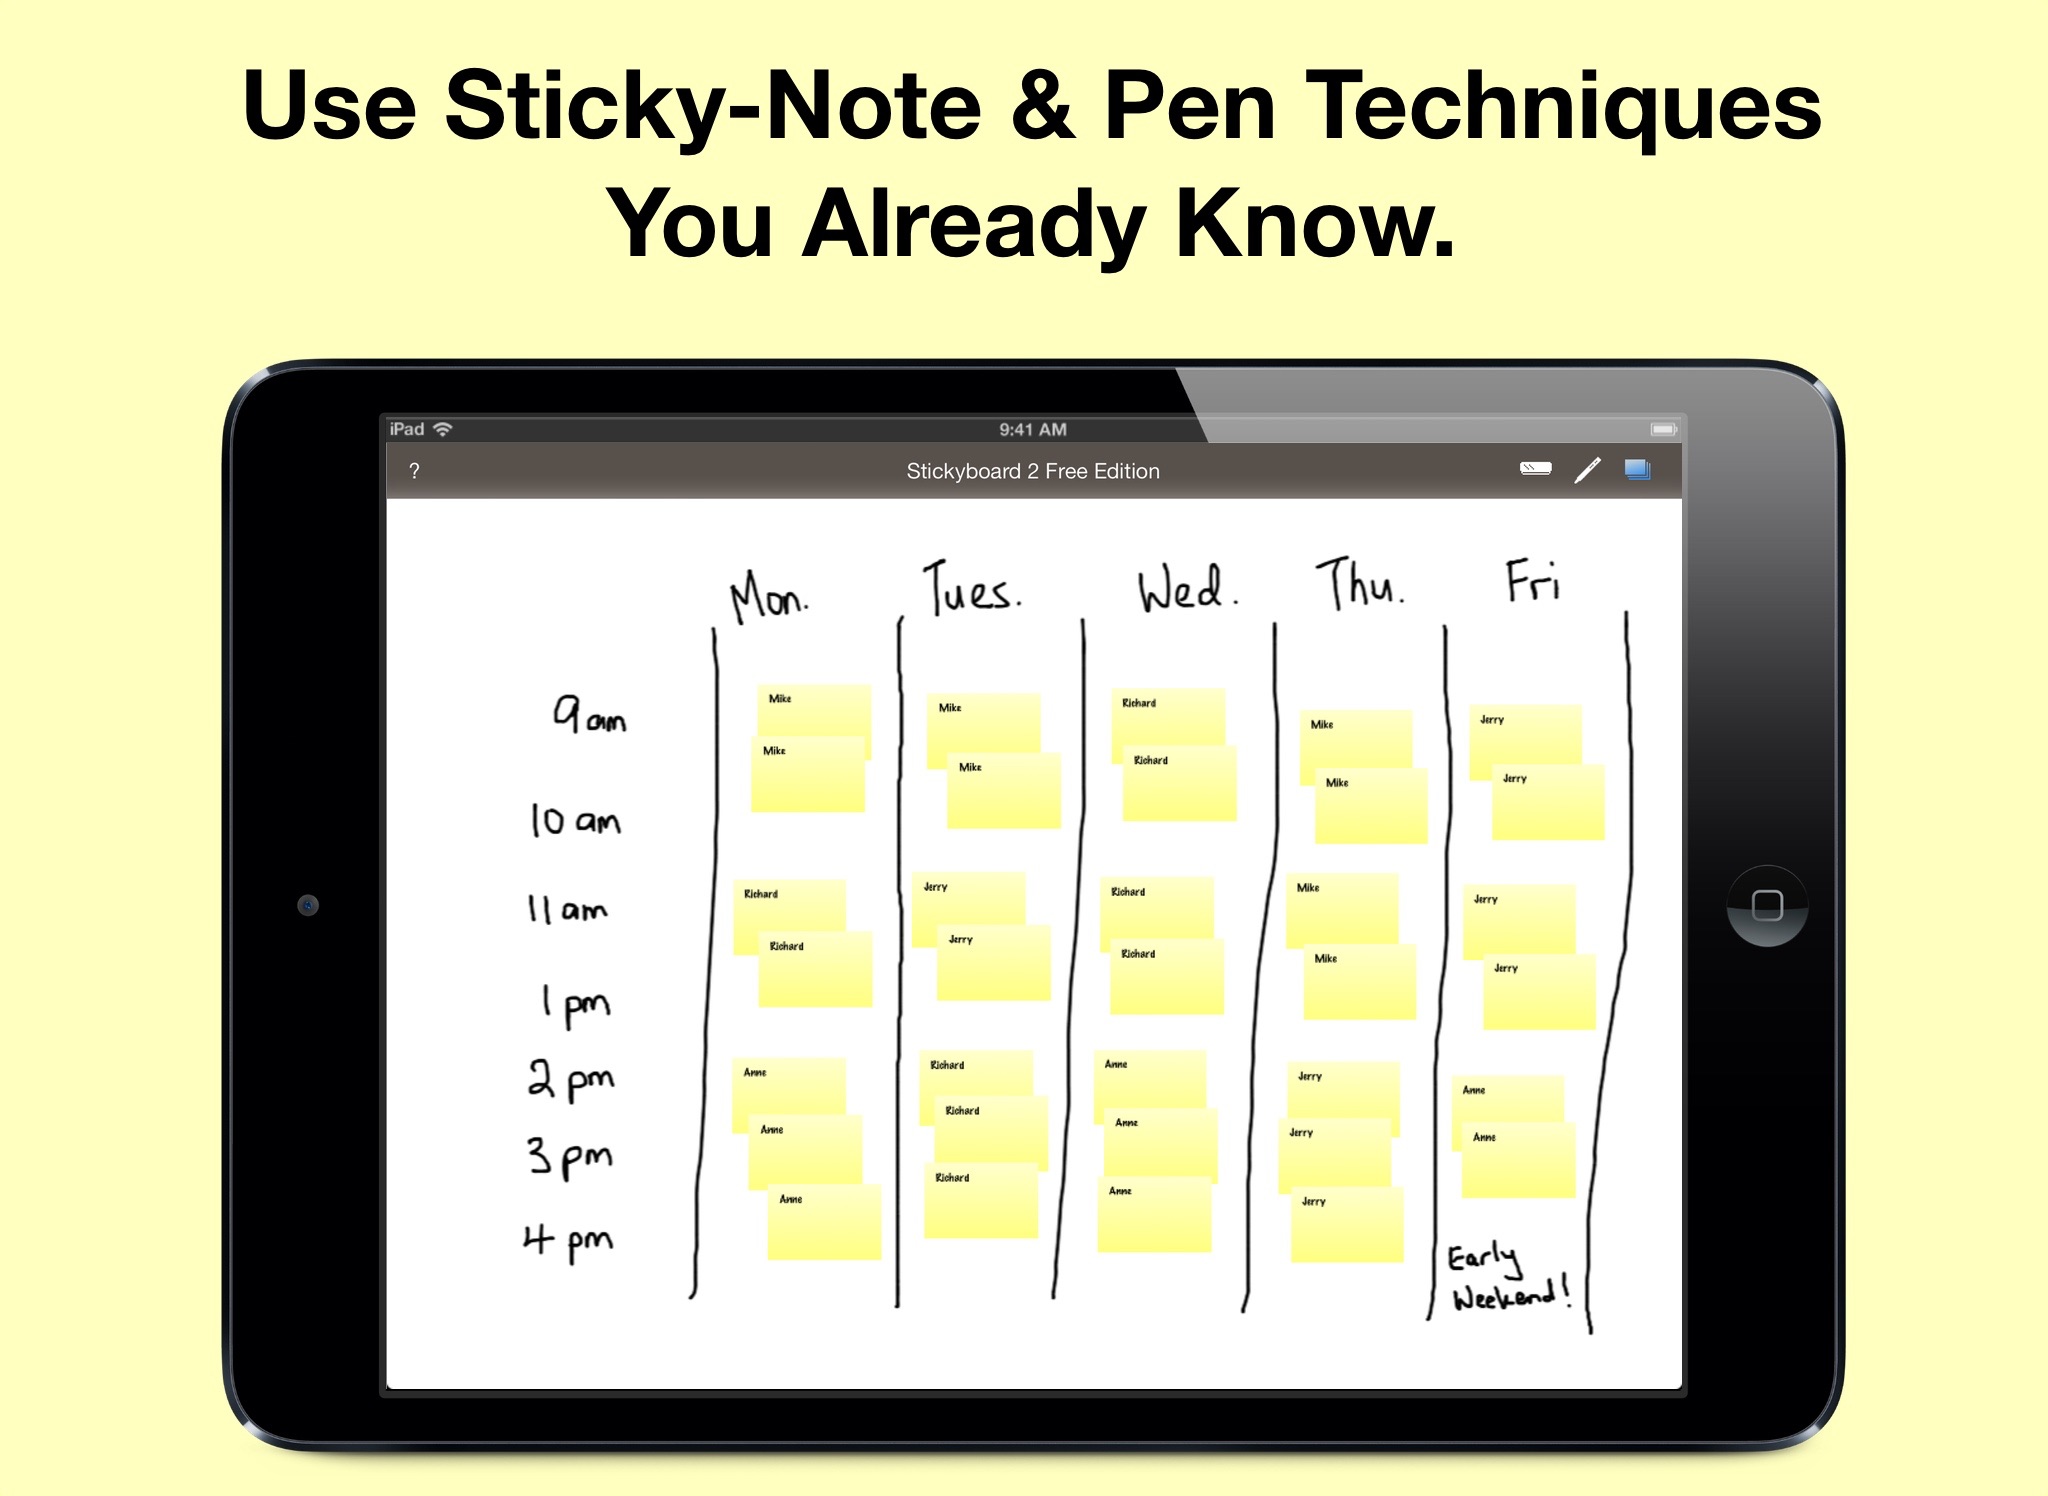 Stickyboard 2 Free Edition: Sticky Notes on a Whiteboard to Brainstorm, Mindmap, Plan, and Organize screenshot 3